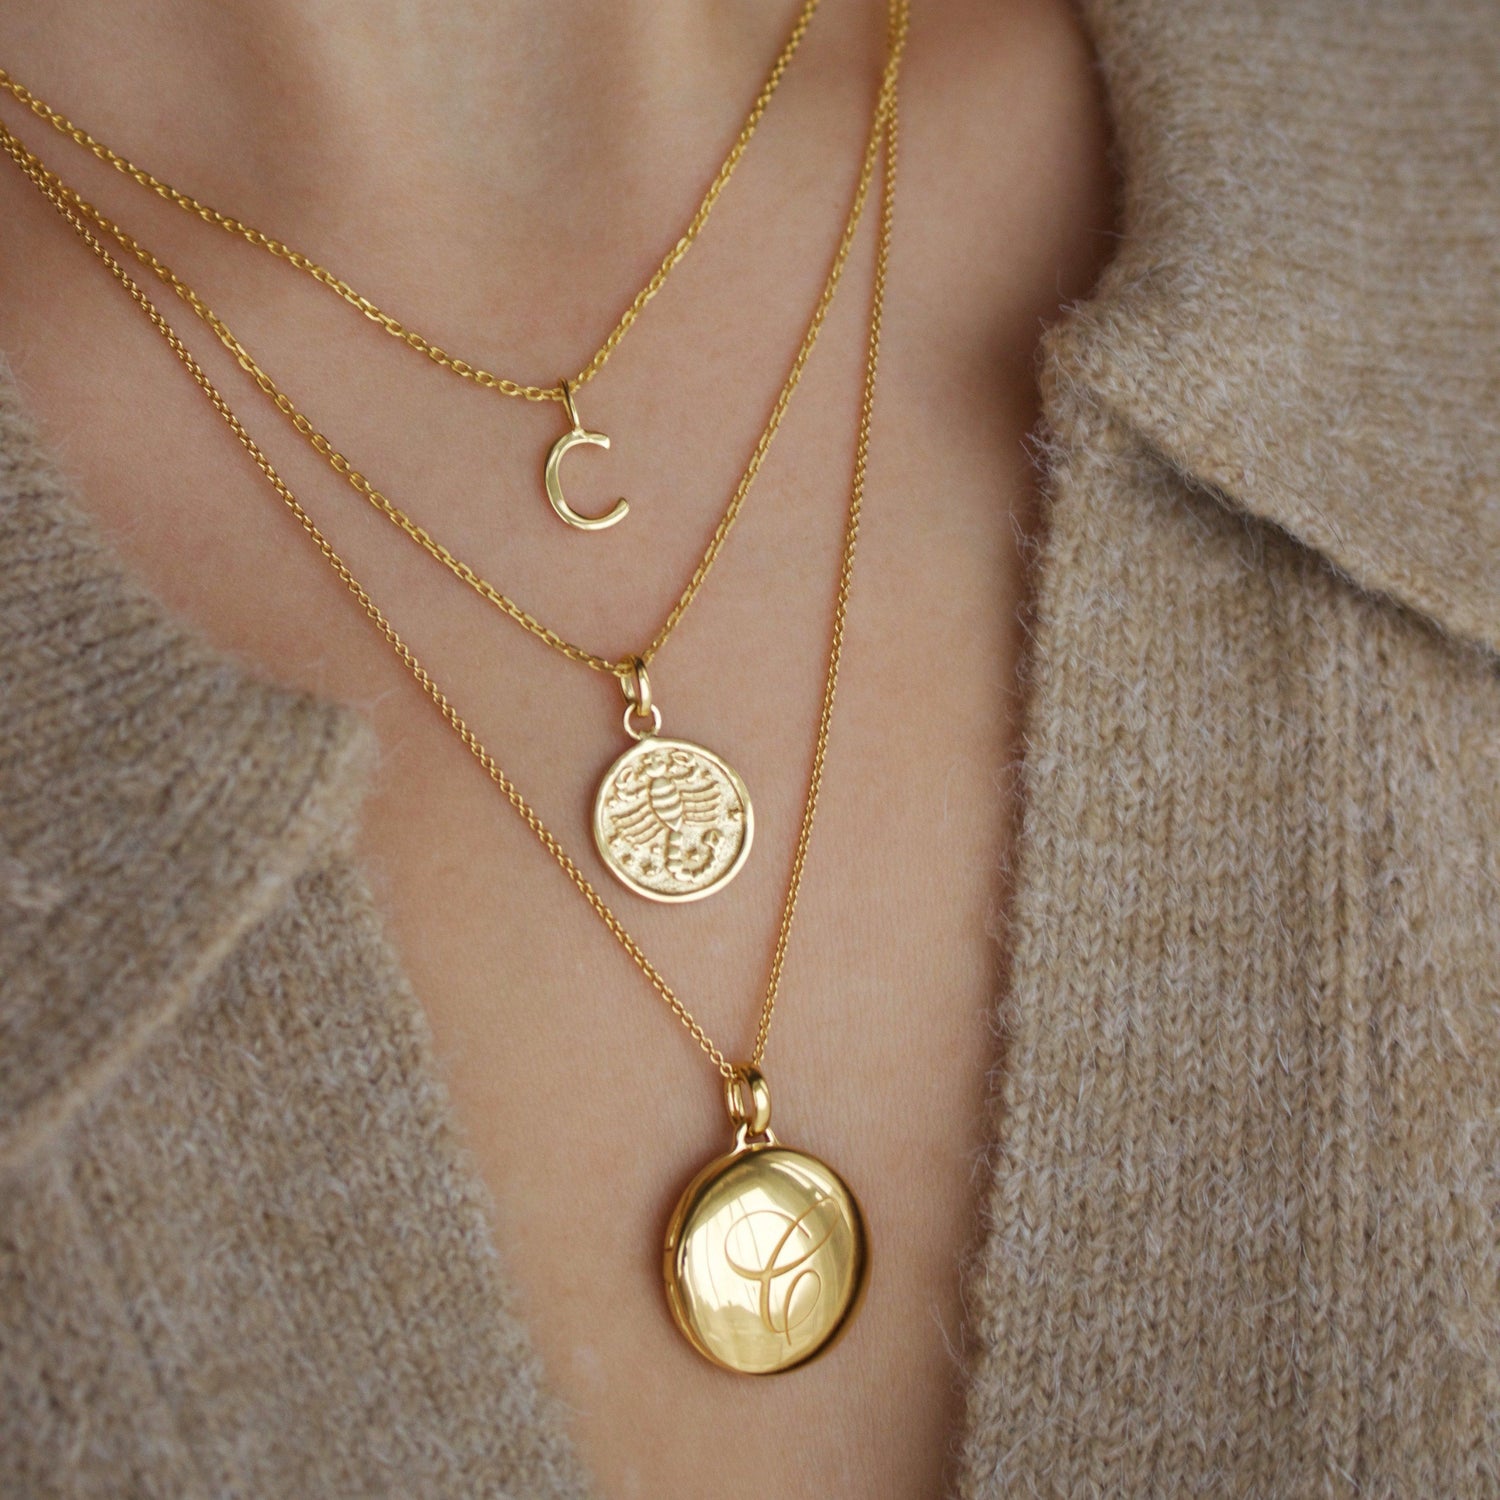 14k Gold Vermeil Delicate Initial Pendant Necklace Necklace Malya 